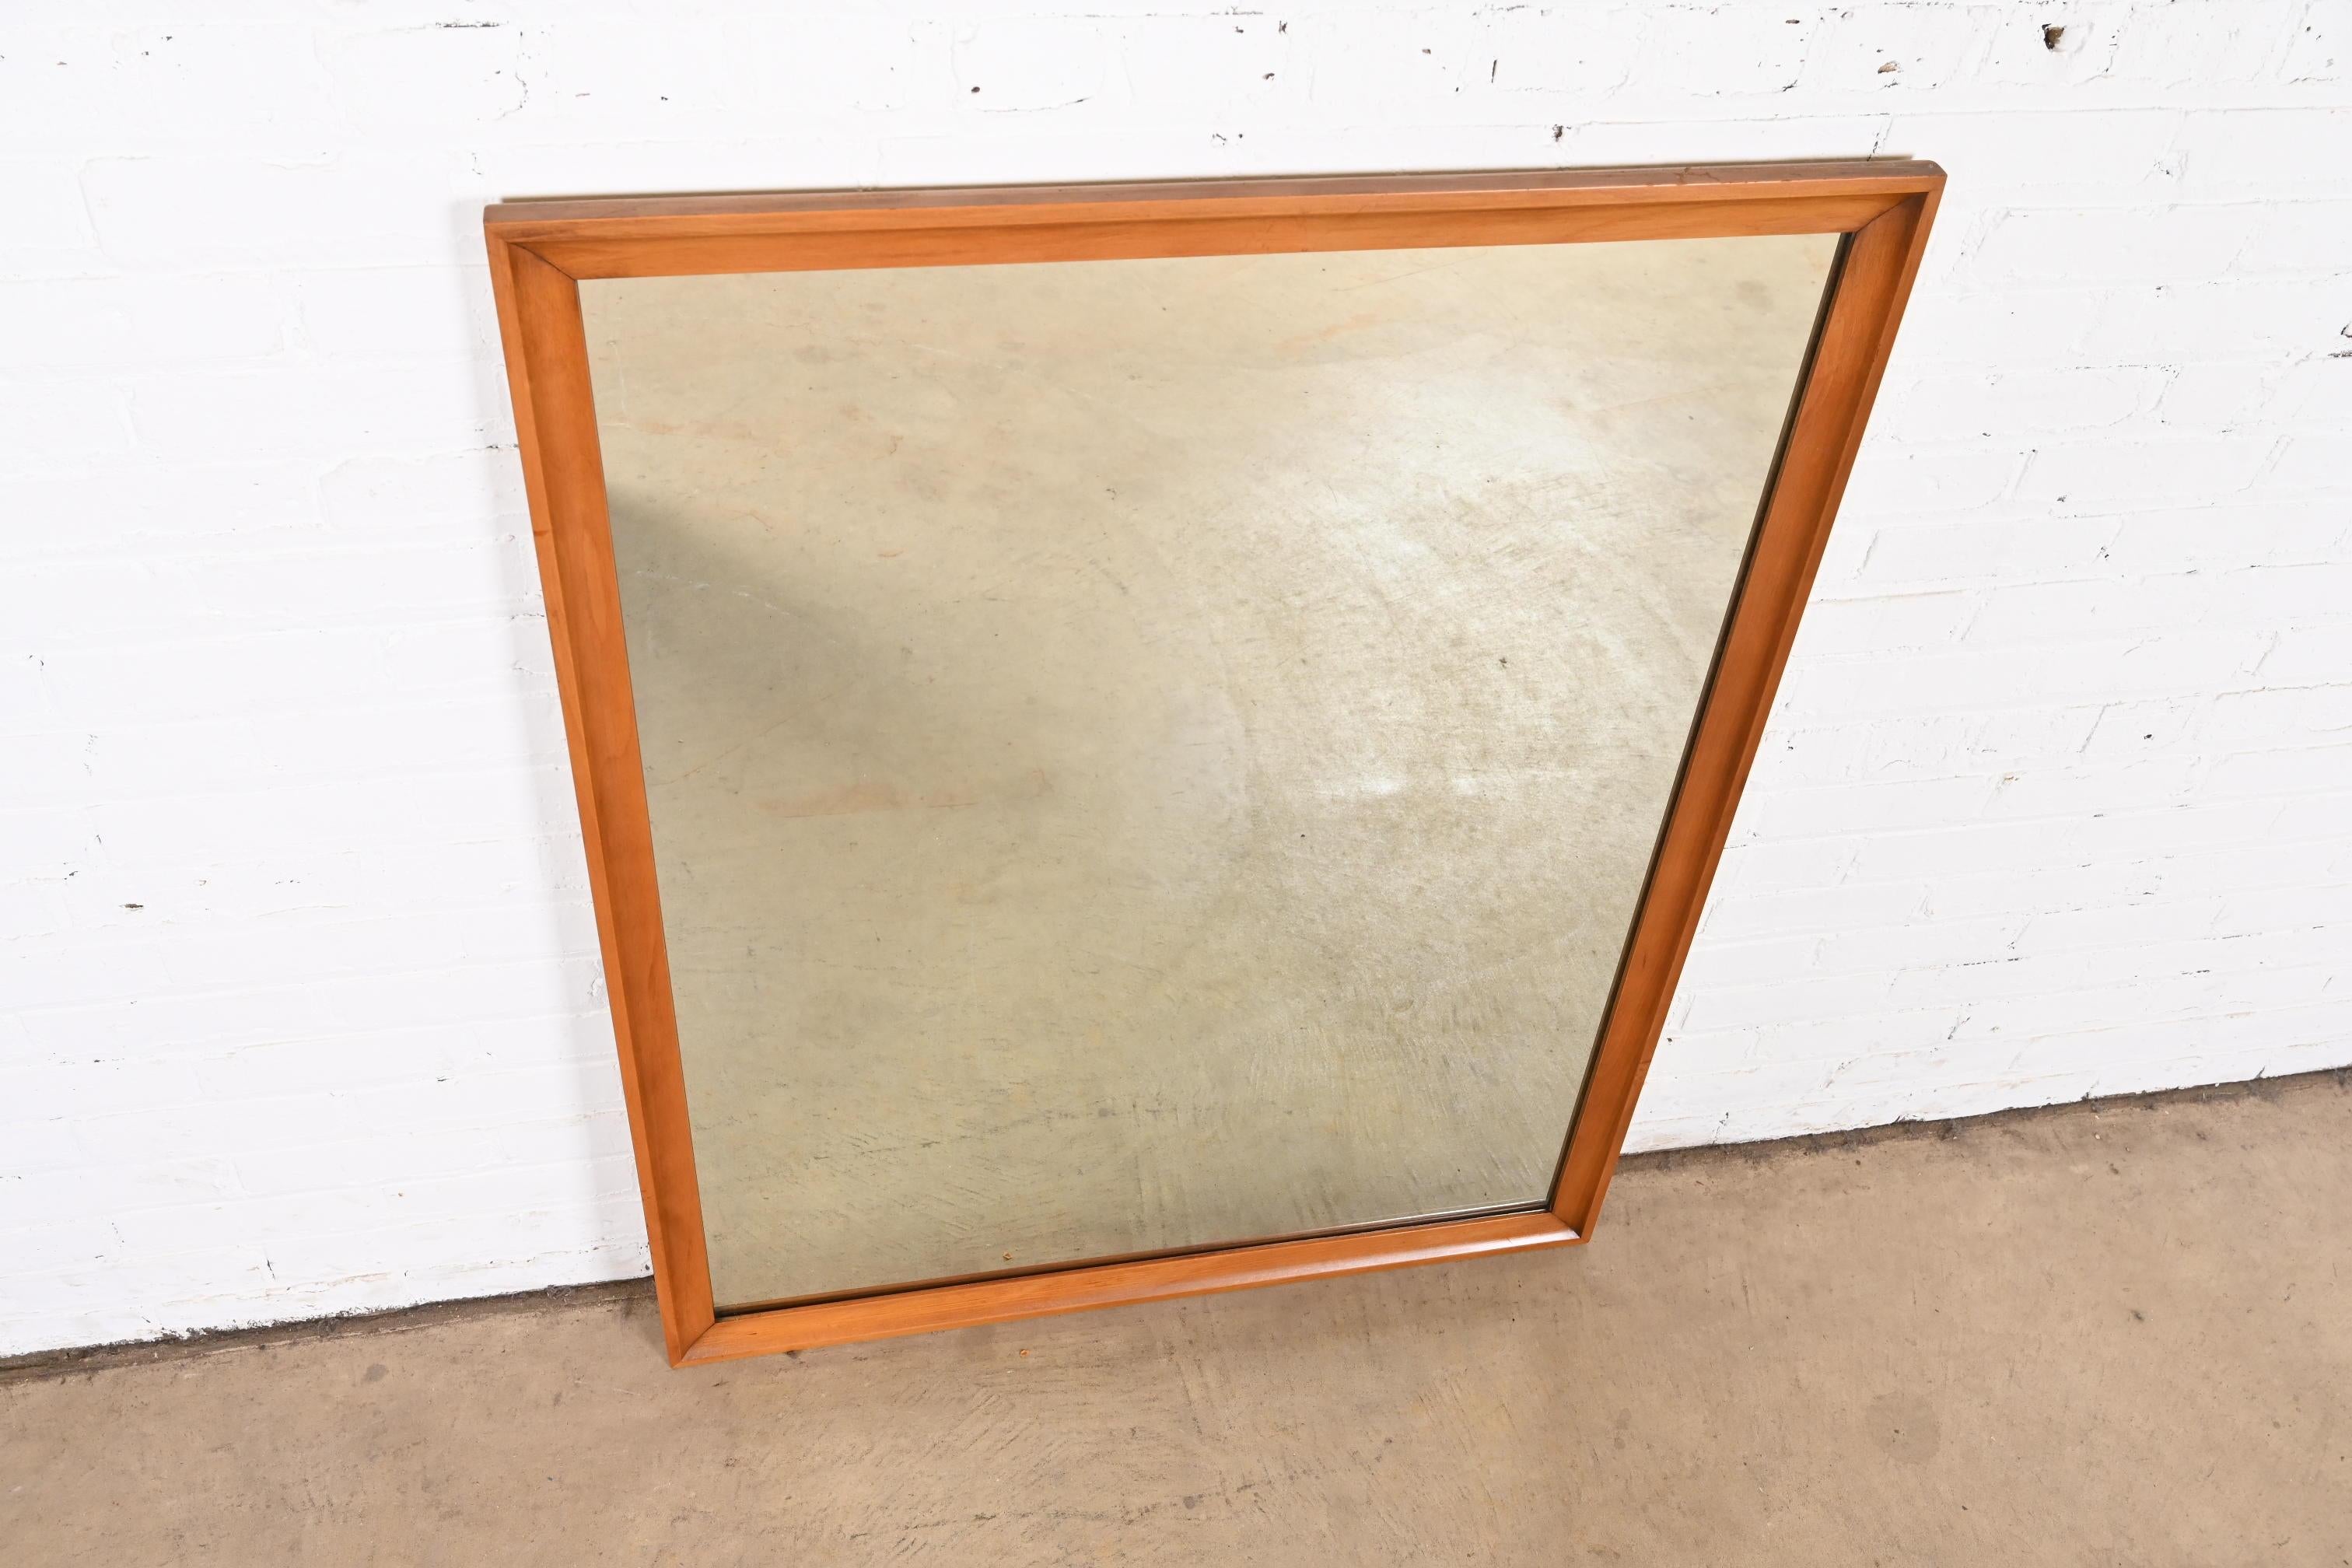 American Mid-Century Modern Wall Mirror in the Manner of Russel Wright for Conant Ball For Sale